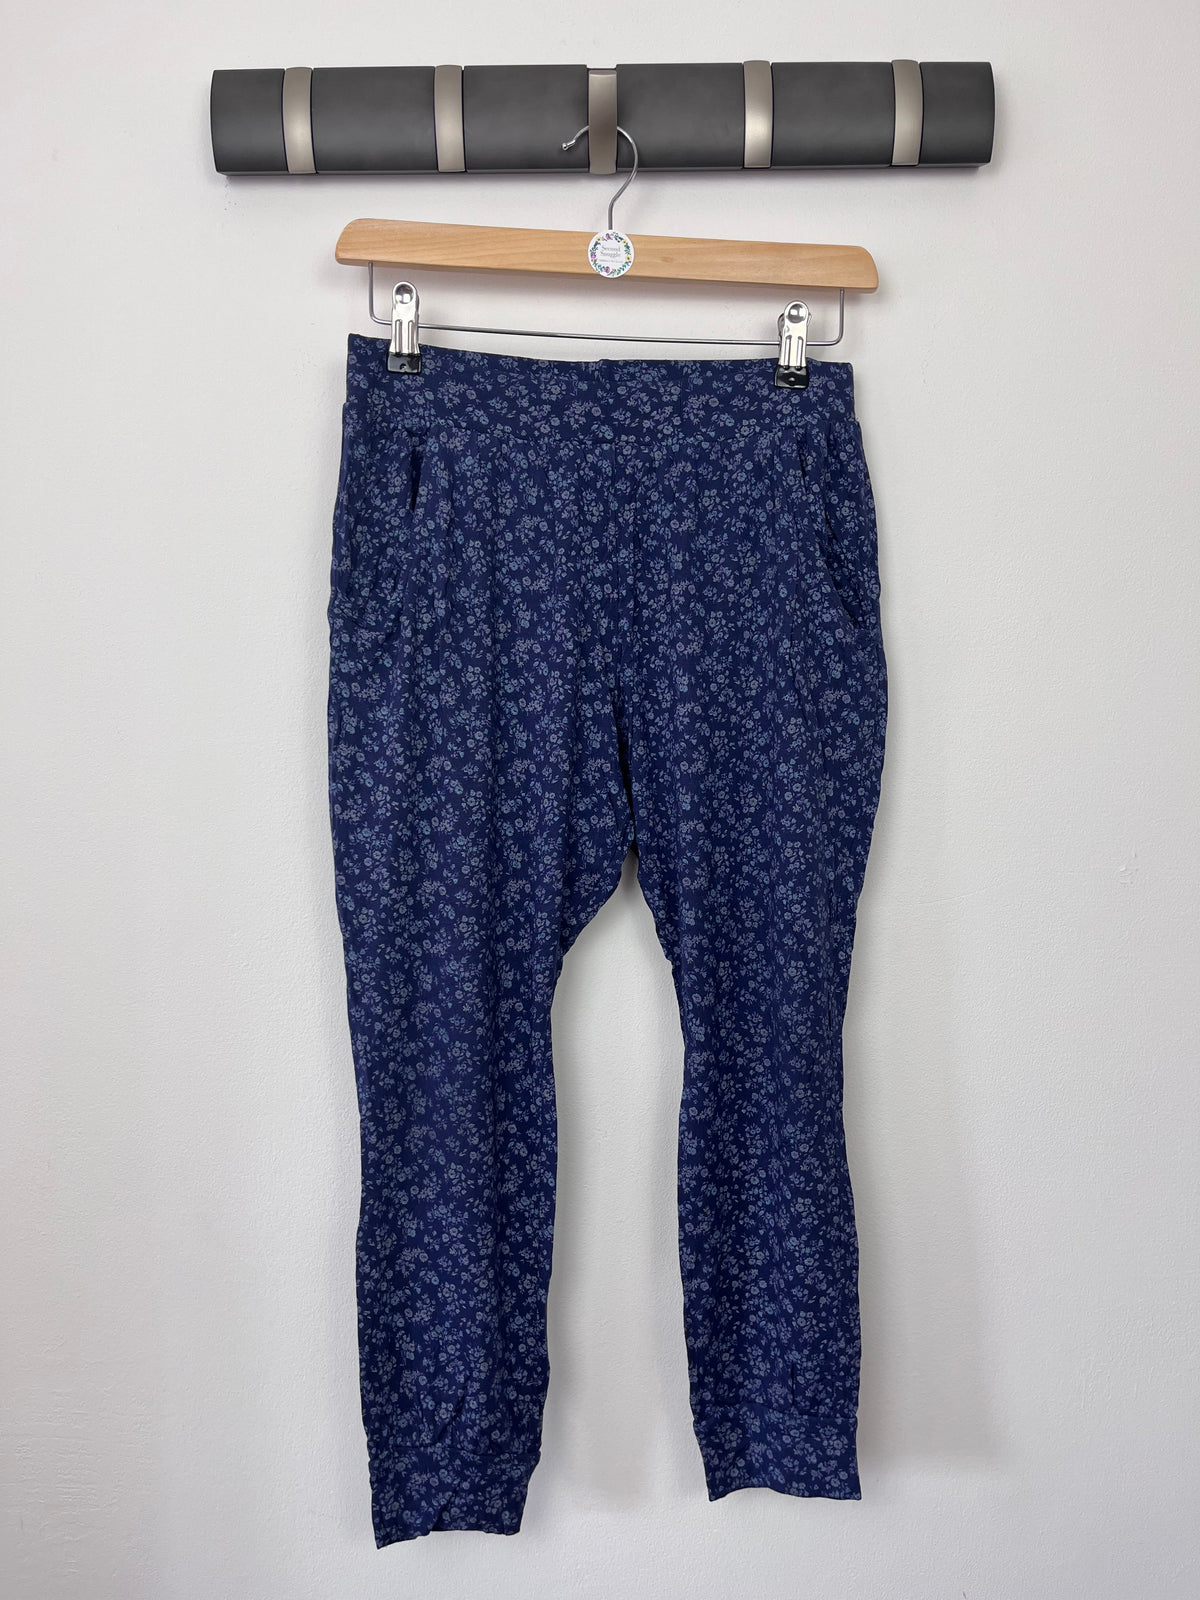 Next 11 Years-Trousers-Second Snuggle Preloved